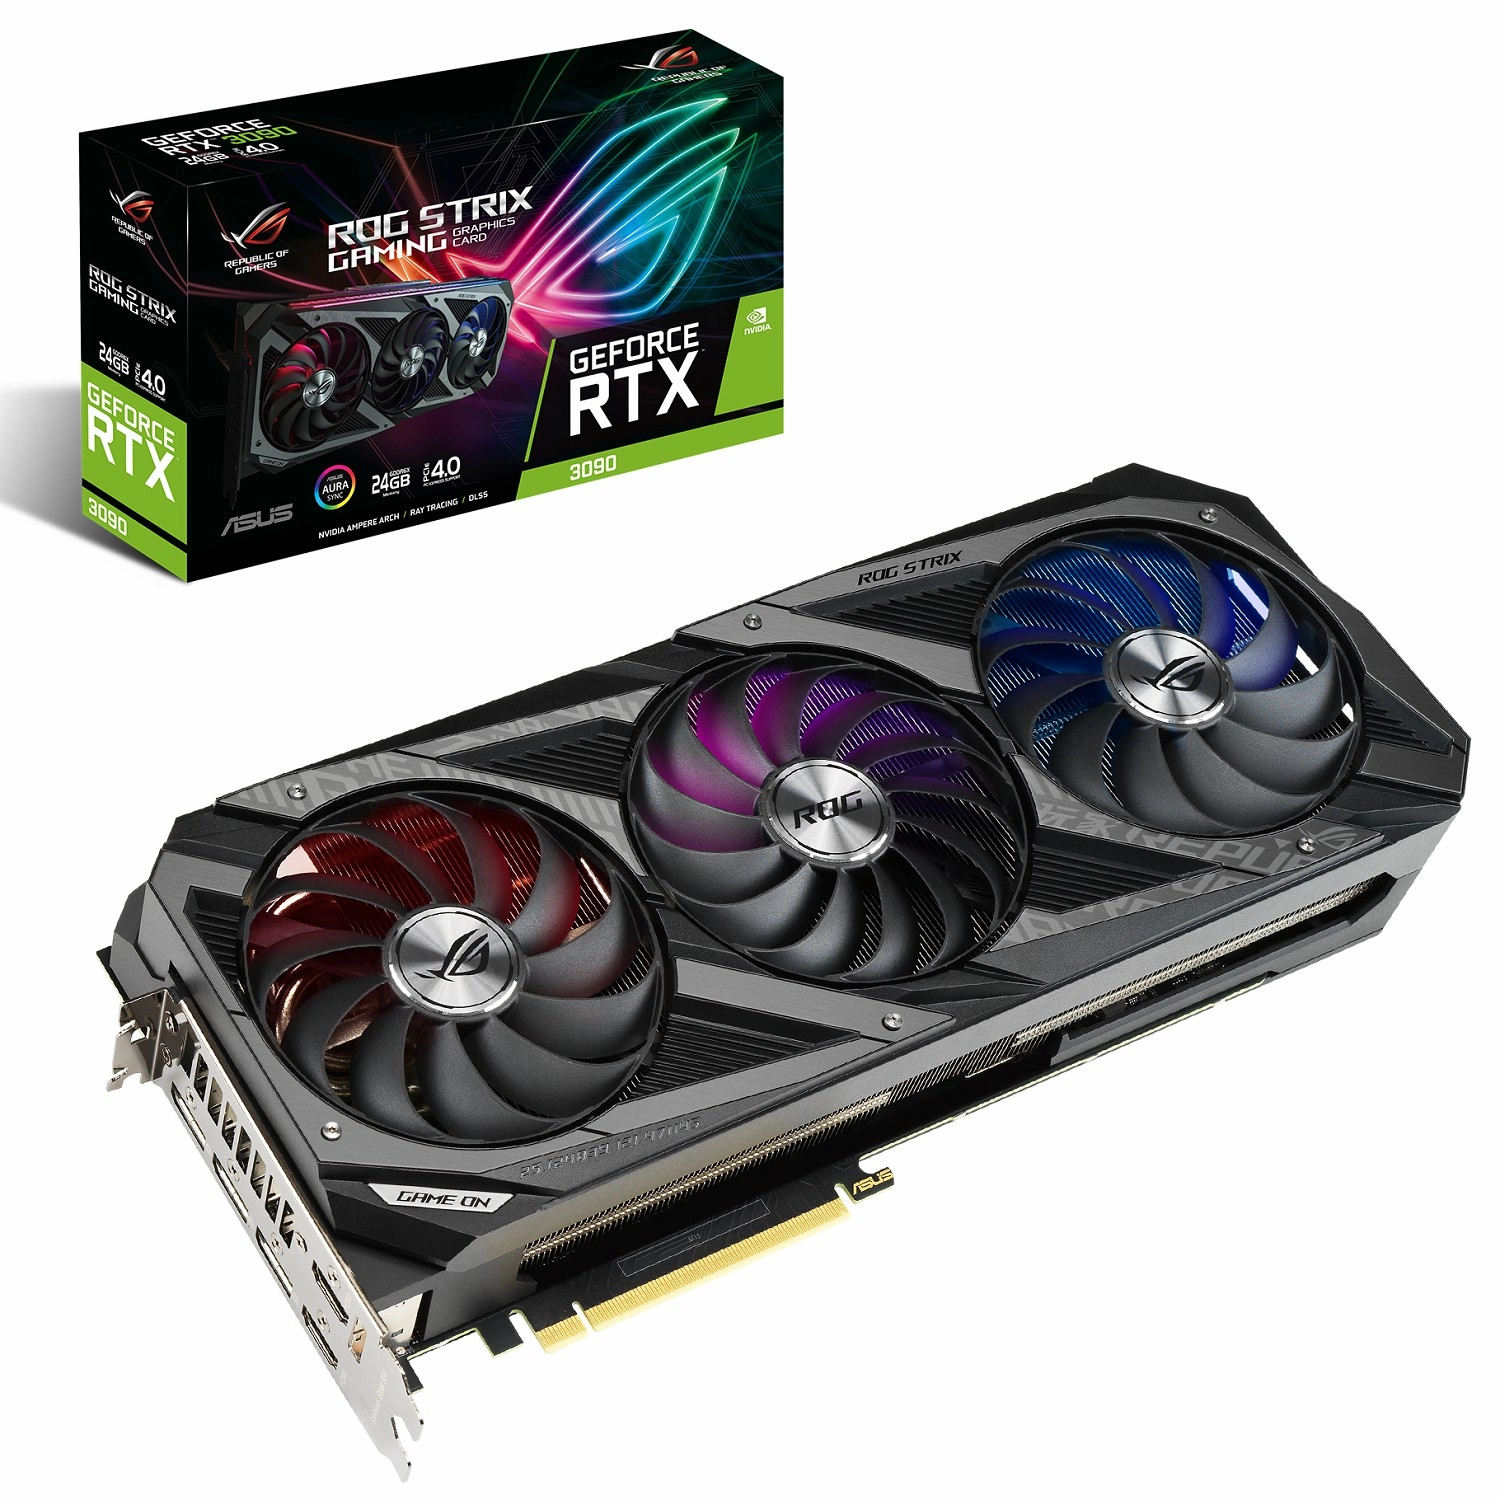 ASUS ROG STRIX RTX 3090 GAMING 24G Package